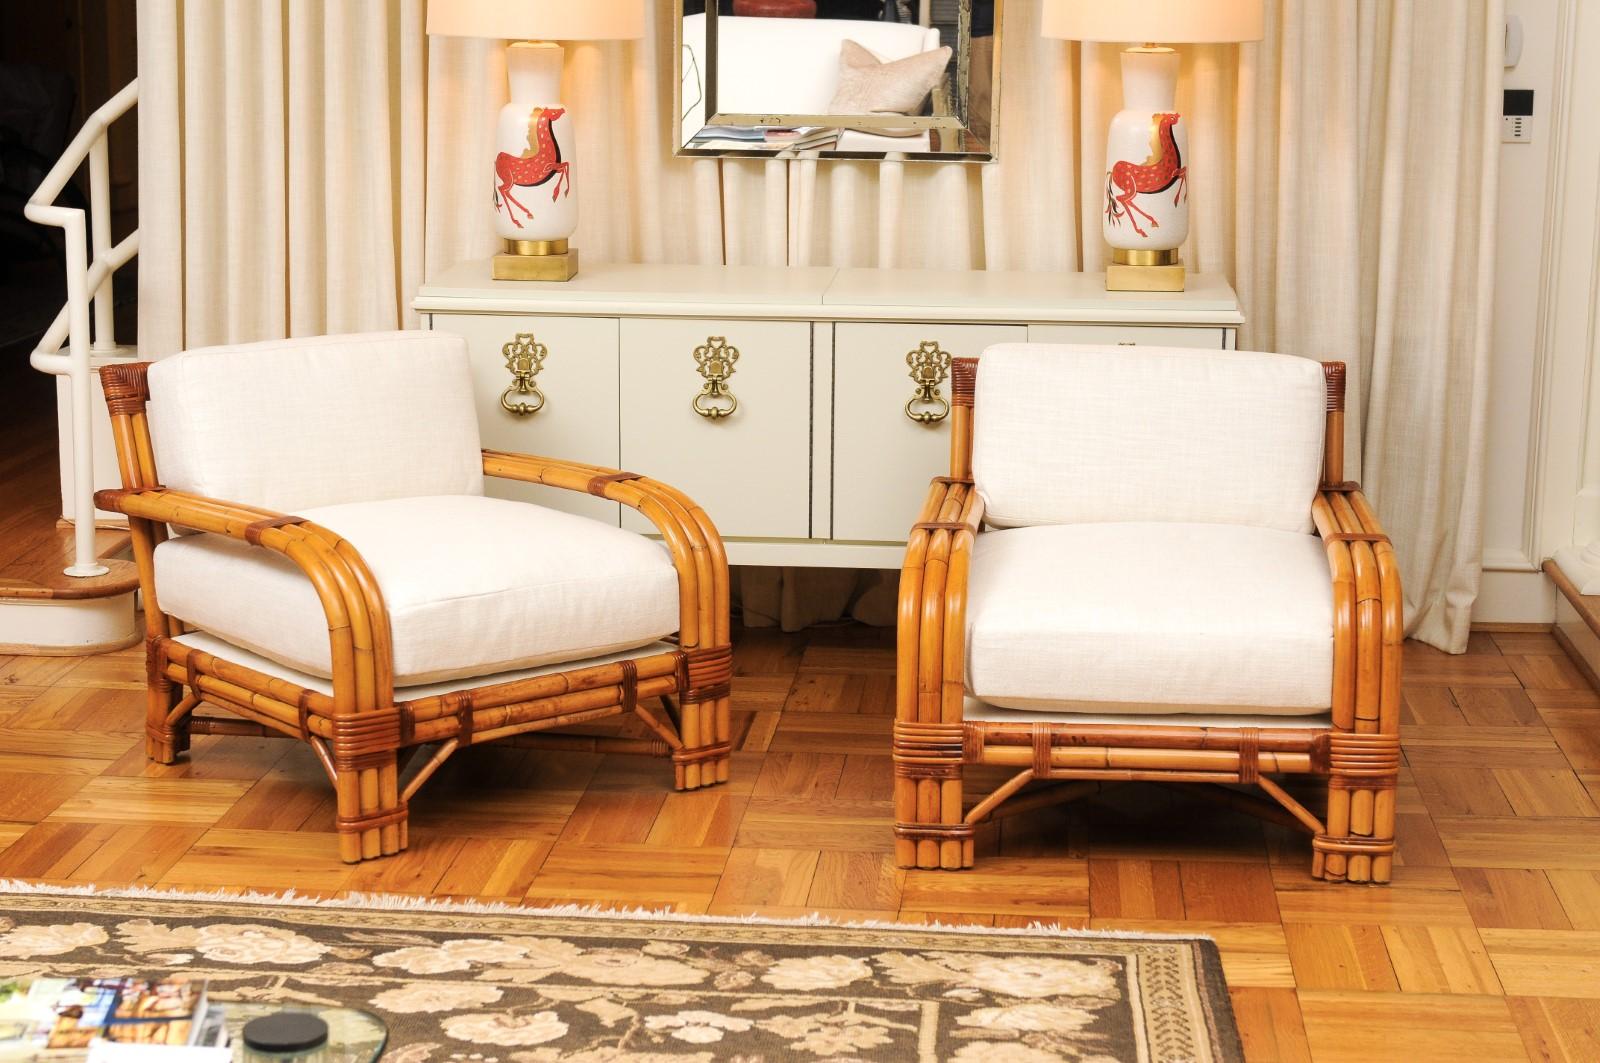 These magnificent lounge chairs are shipped as professionally photographed and described in the listing narrative: Meticulously professionally restored, upholstered and completely installation ready. Expert custom upholstery service is available.

A